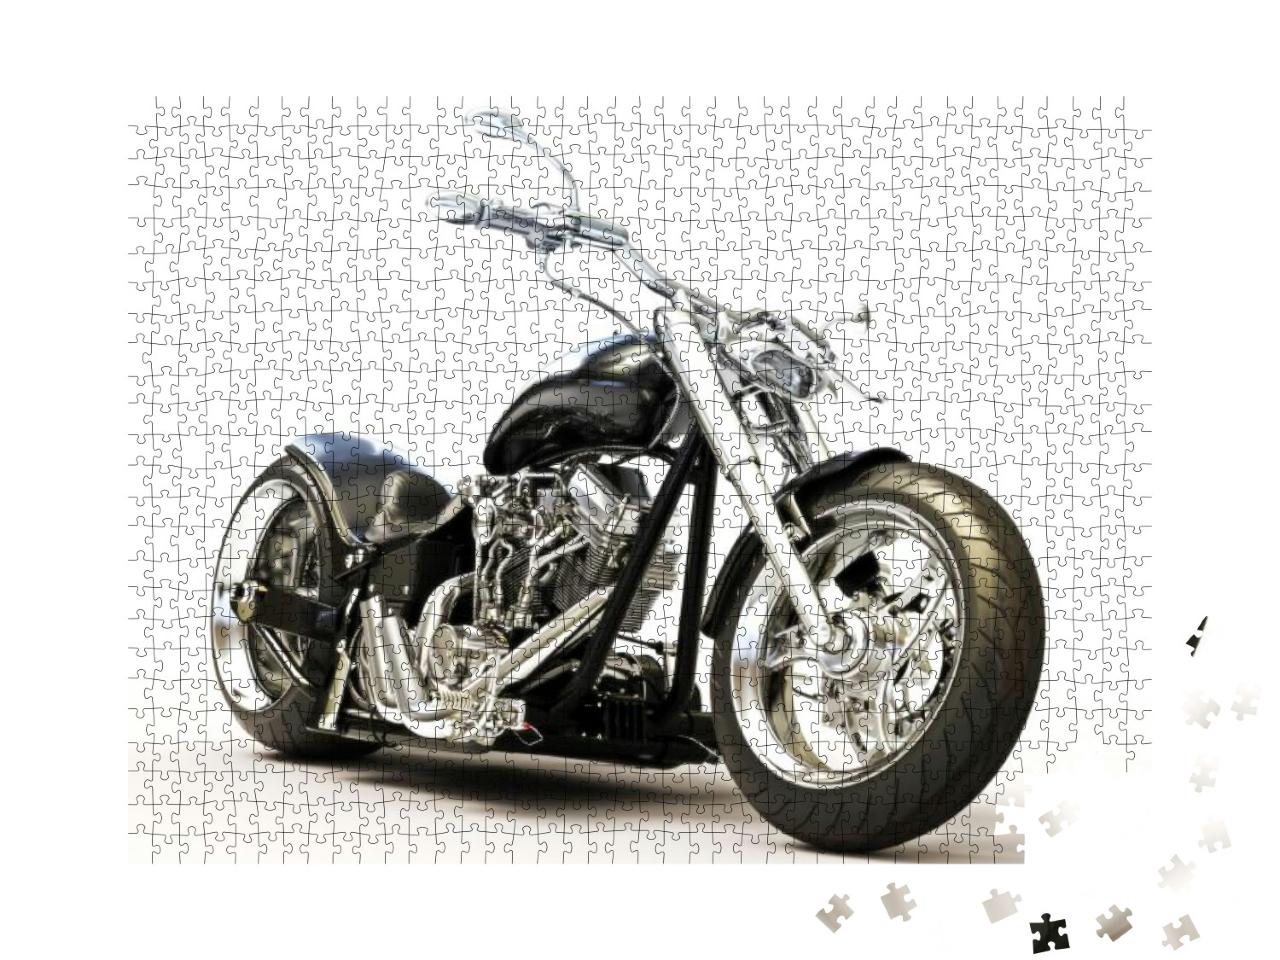 Custom Black Motorcycle on a White Background... Jigsaw Puzzle with 1000 pieces